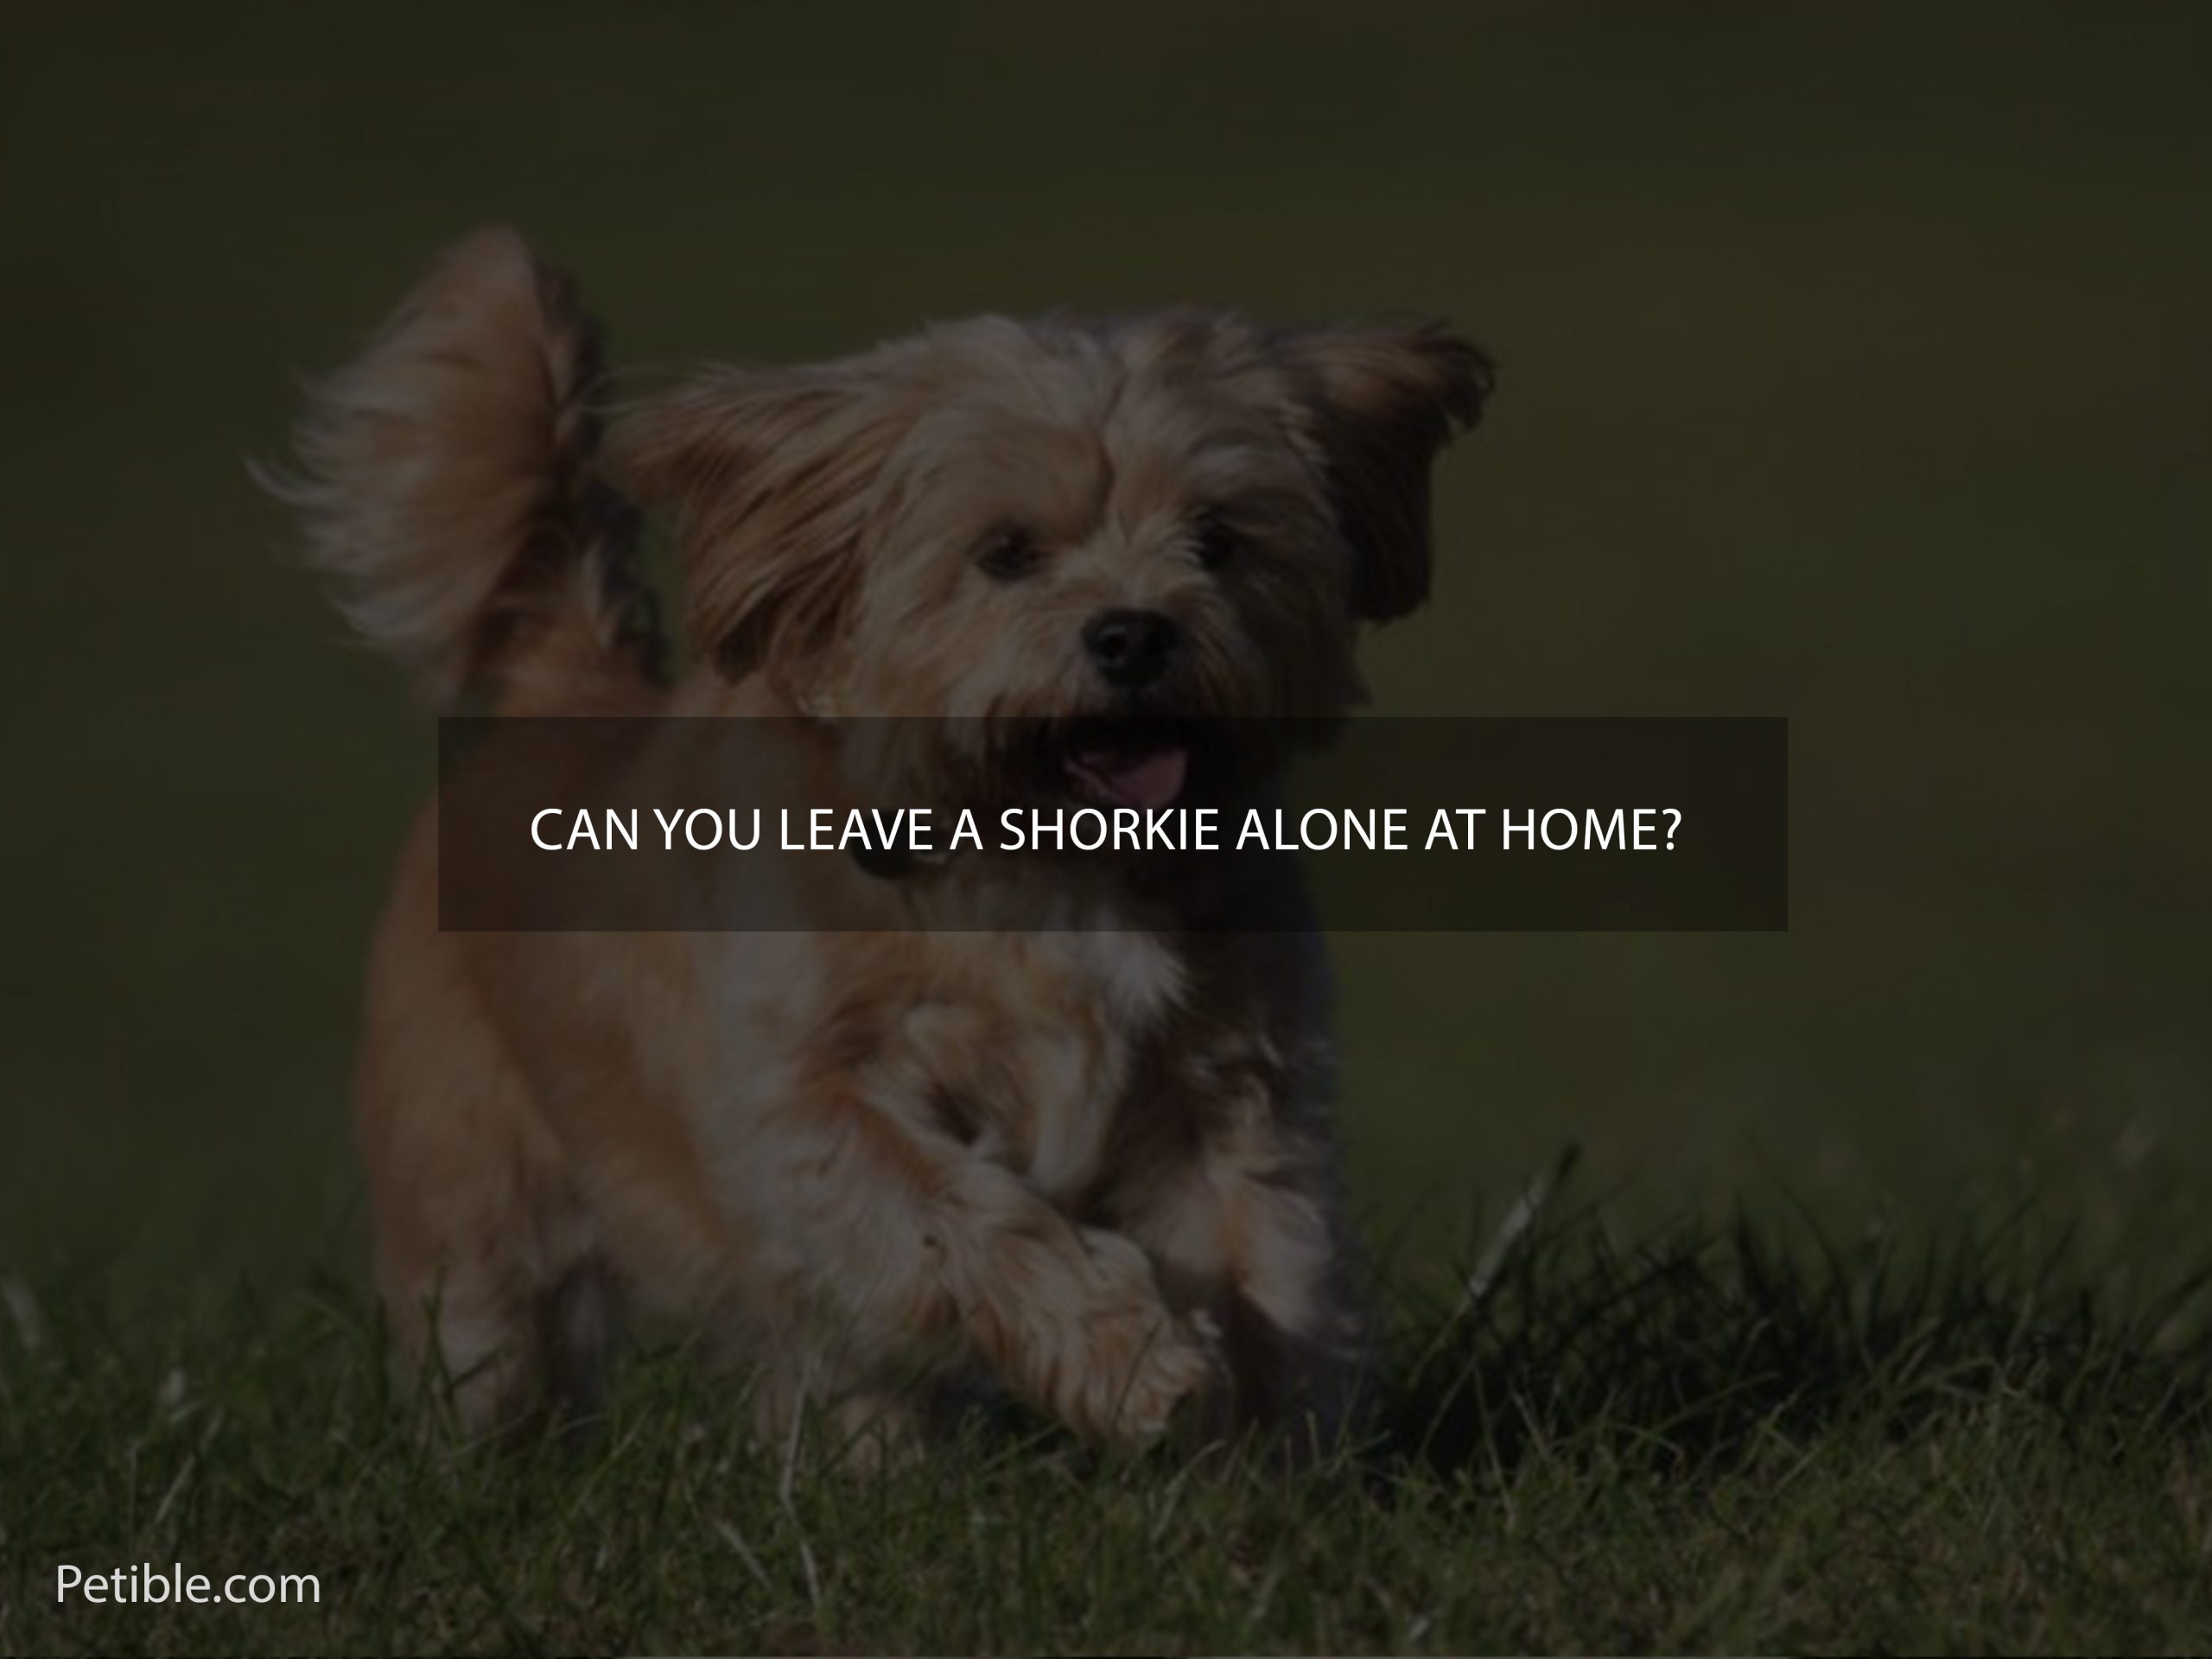 Can you leave a Shorkie alone at home?